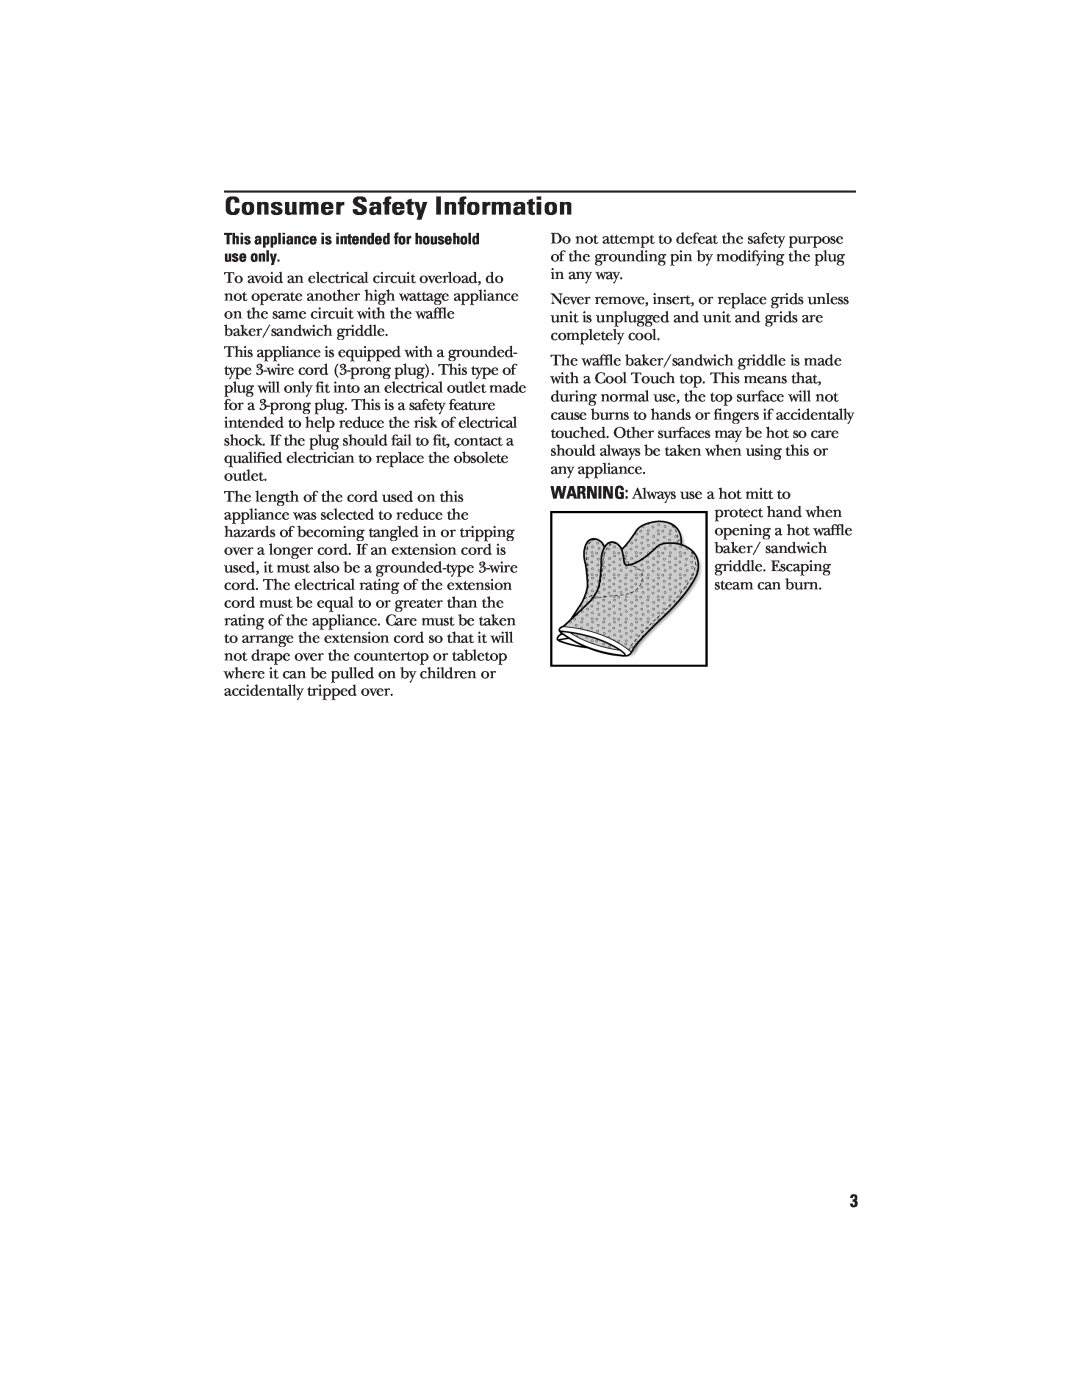 GE 106582, 840085700 manual Consumer Safety Information, This appliance is intended for household use only 